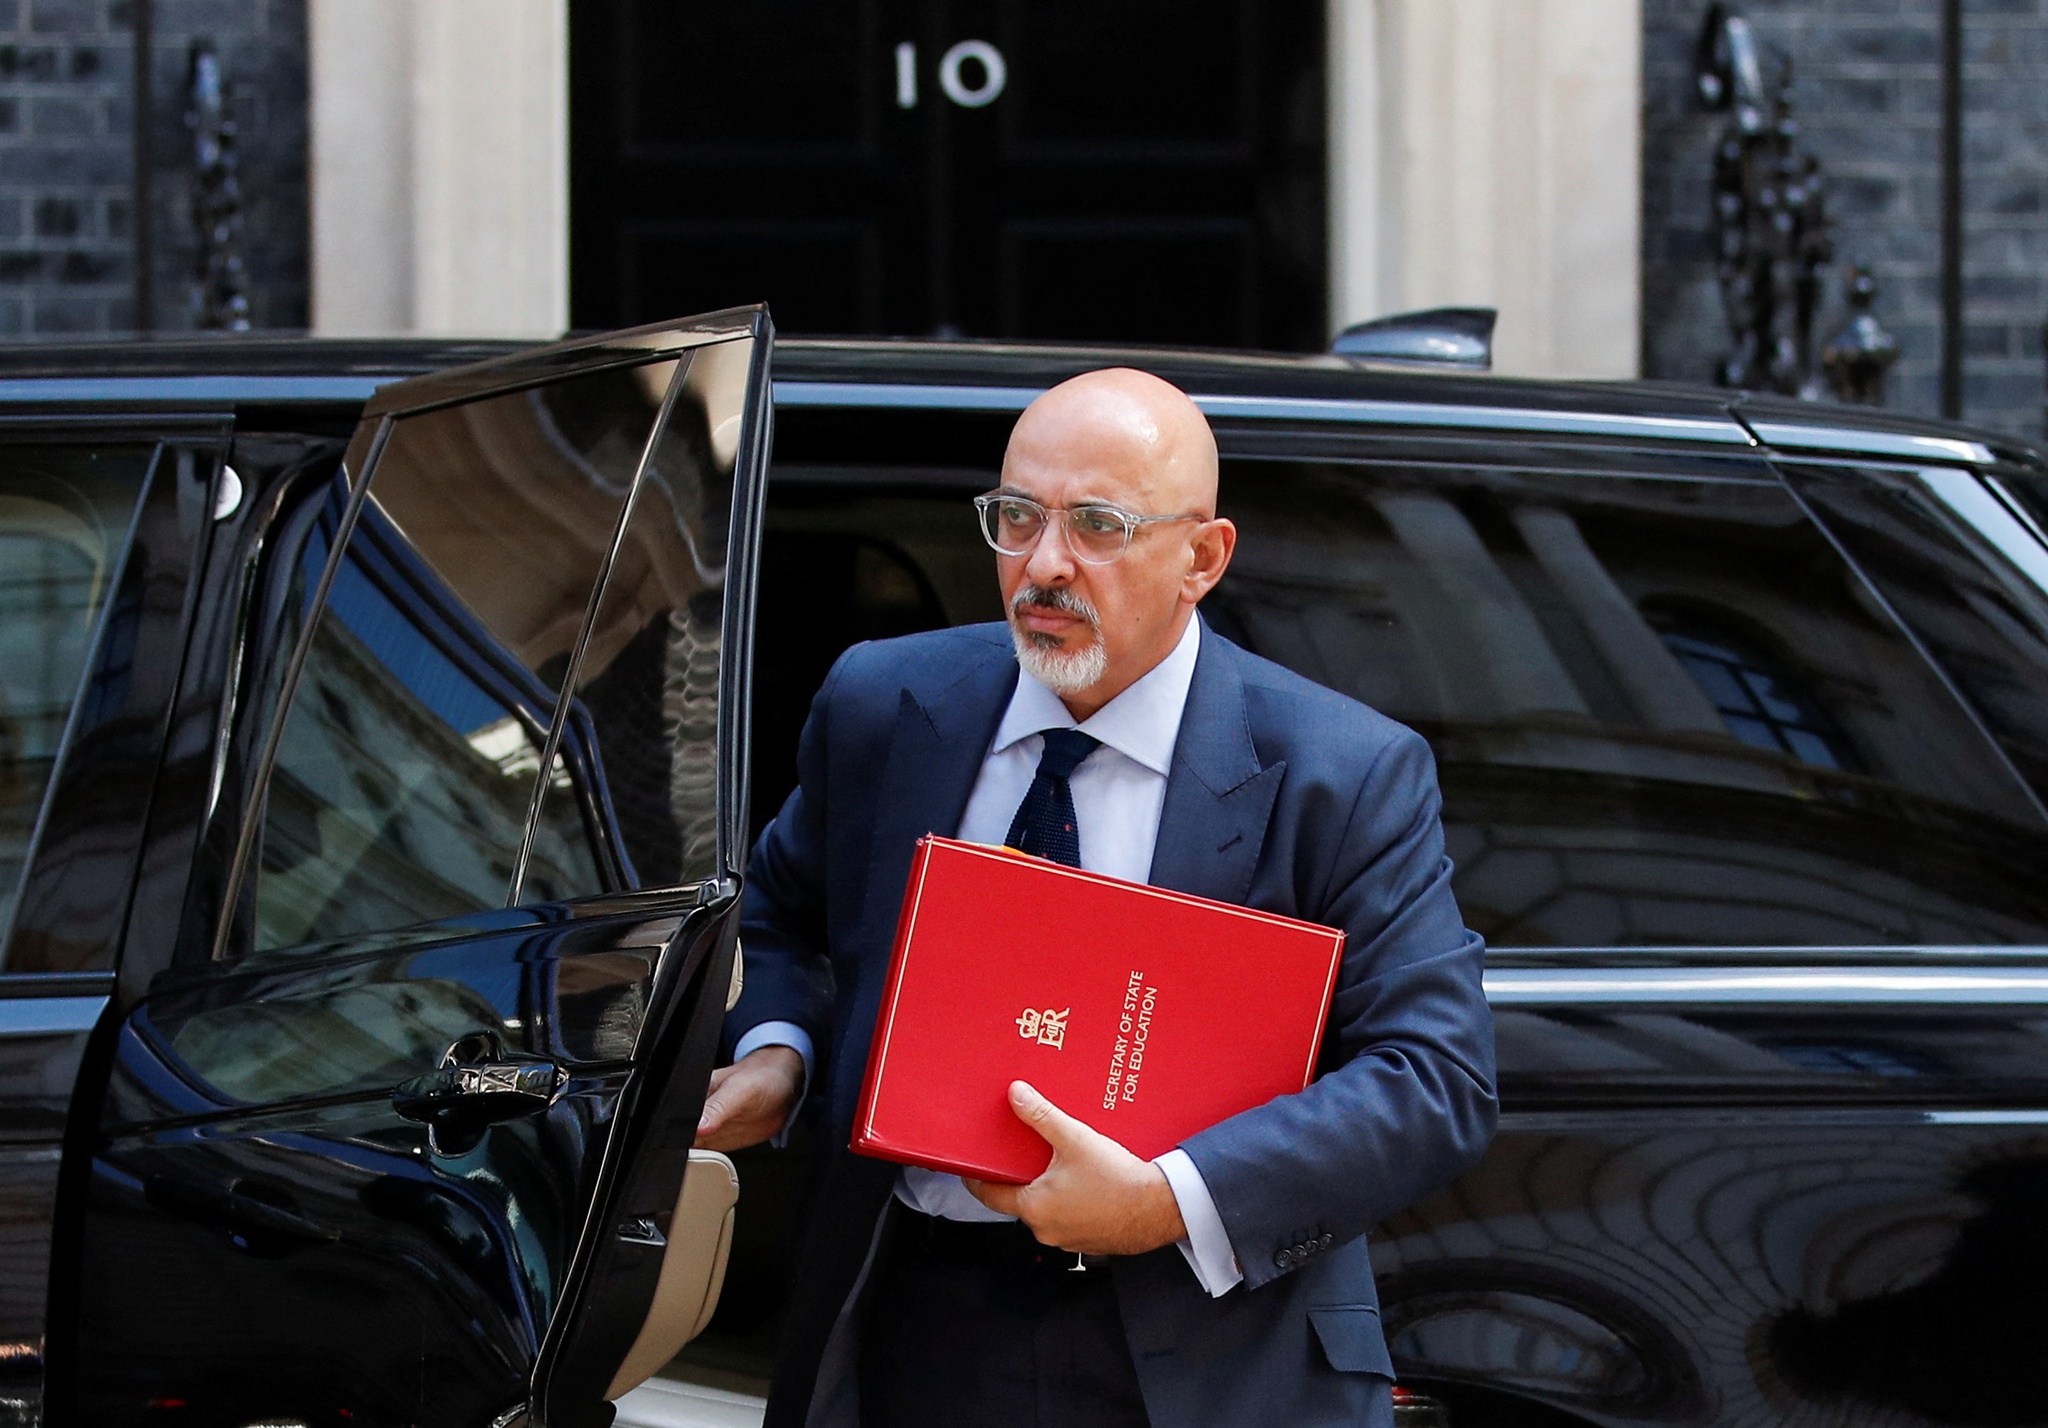 Ex-British Chancellor of the Exchequer Justifies Tax Penalty as “Unnecessary Error” |  UK